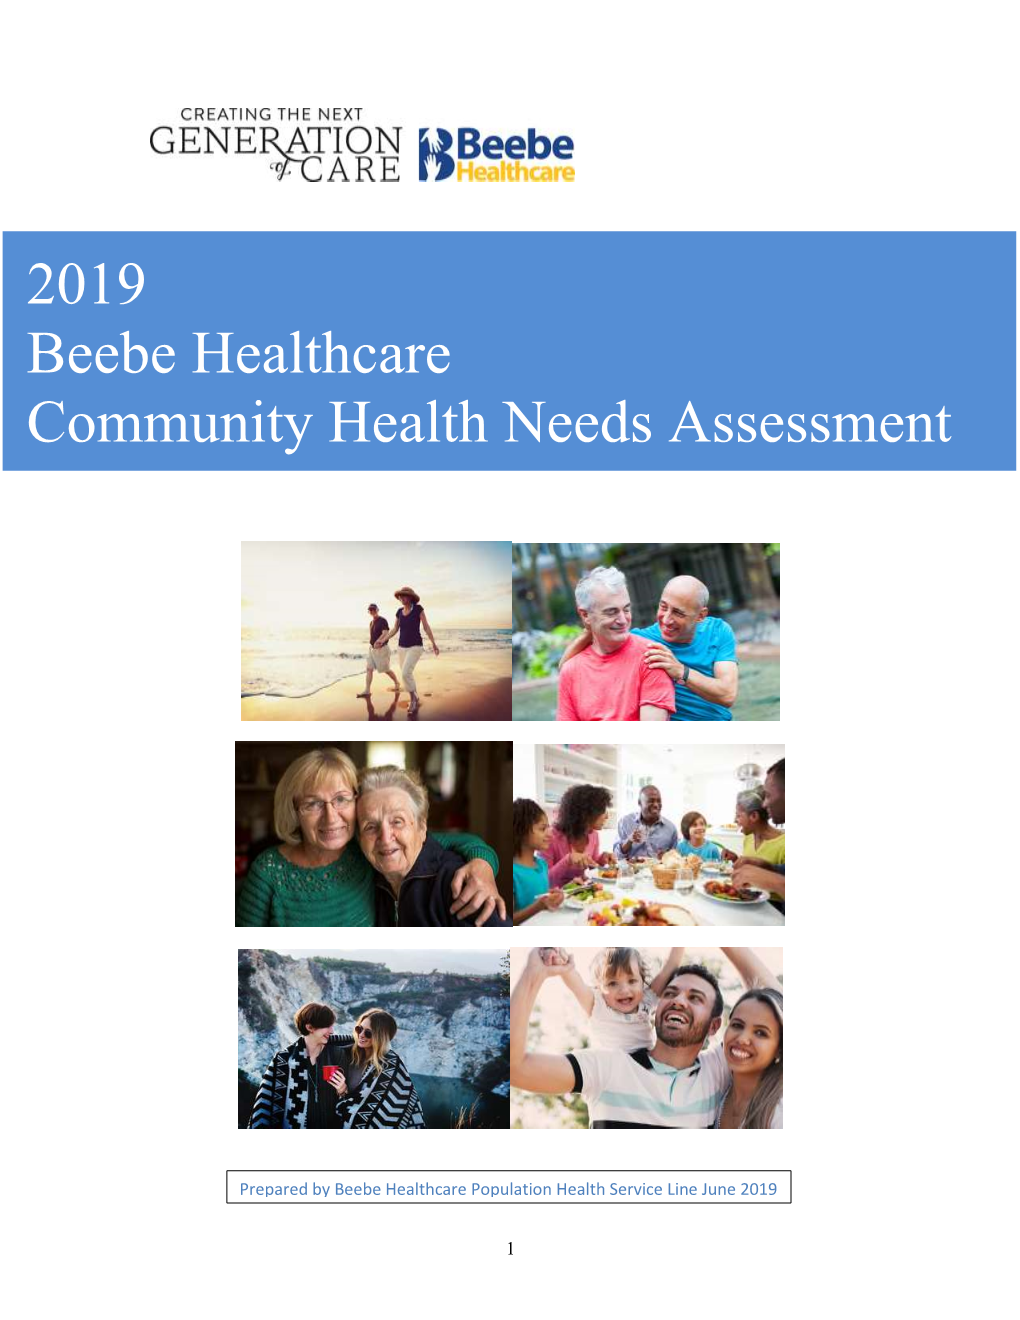 2019 Beebe Healthcare Community Health Needs Assessment